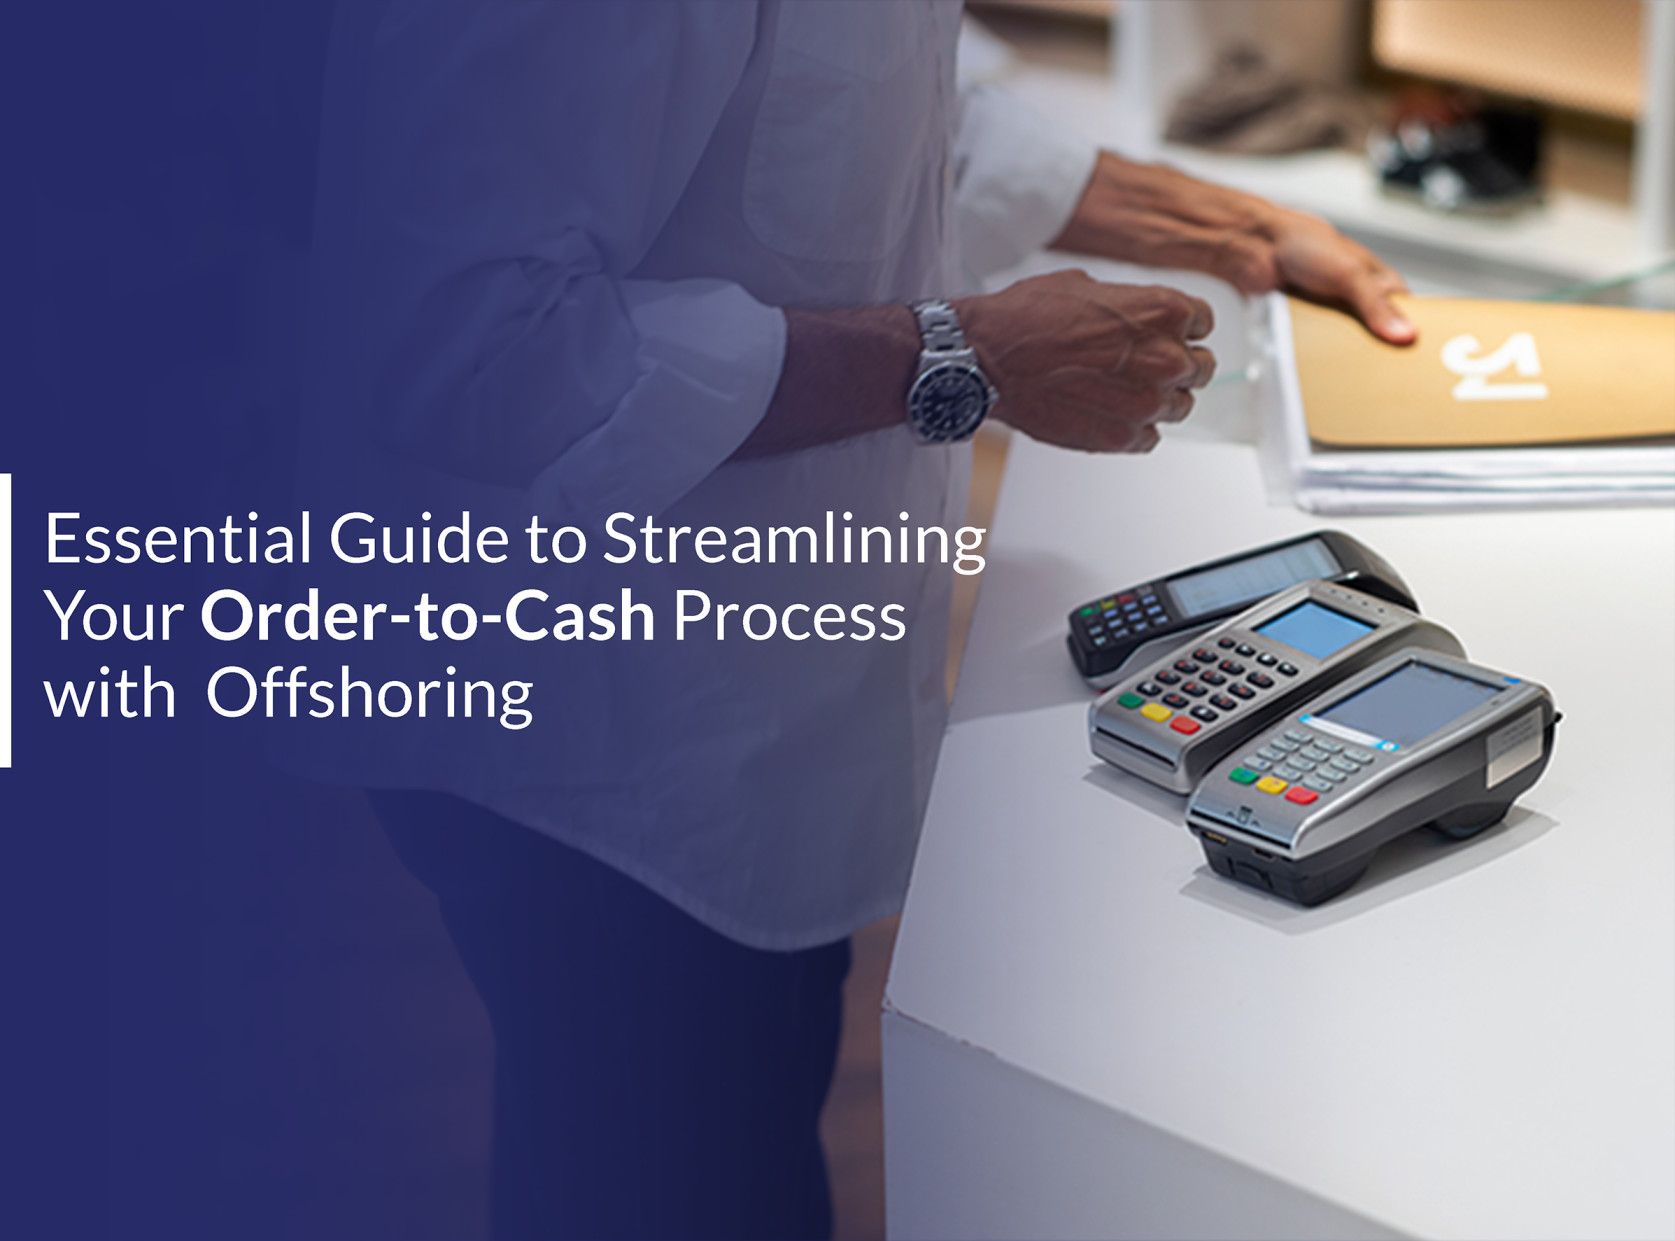 Streamlining Your Order-to-Cash Process with Offshoring